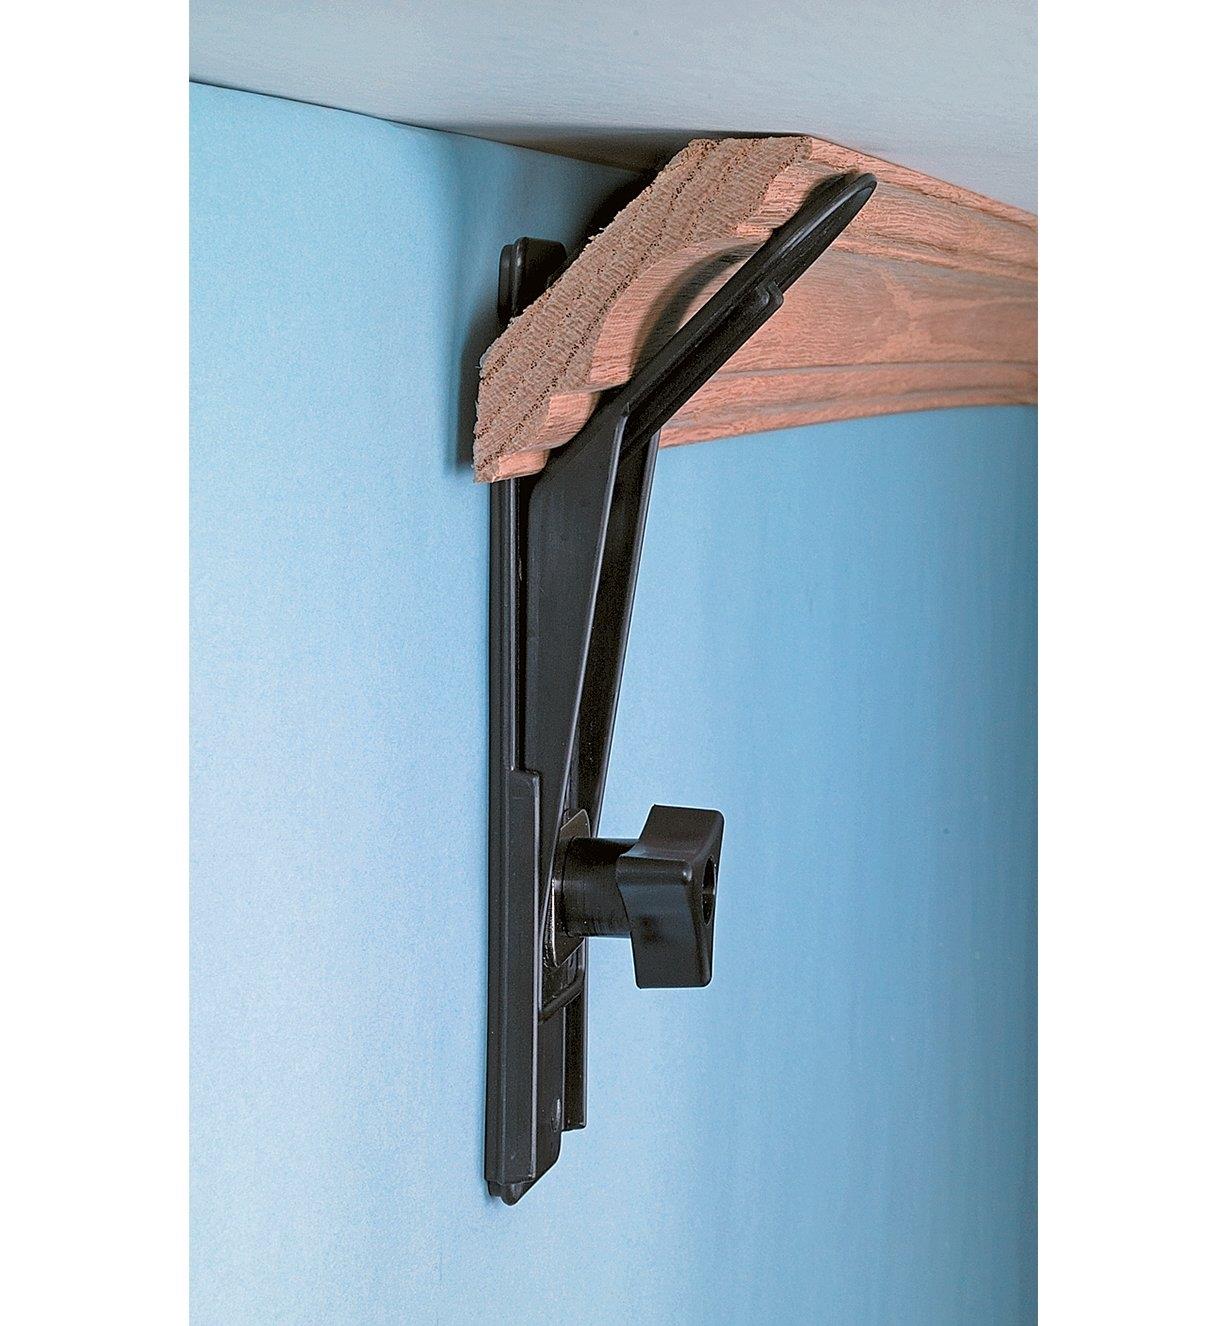 Crown Molding Hanger holding molding in position against a ceiling